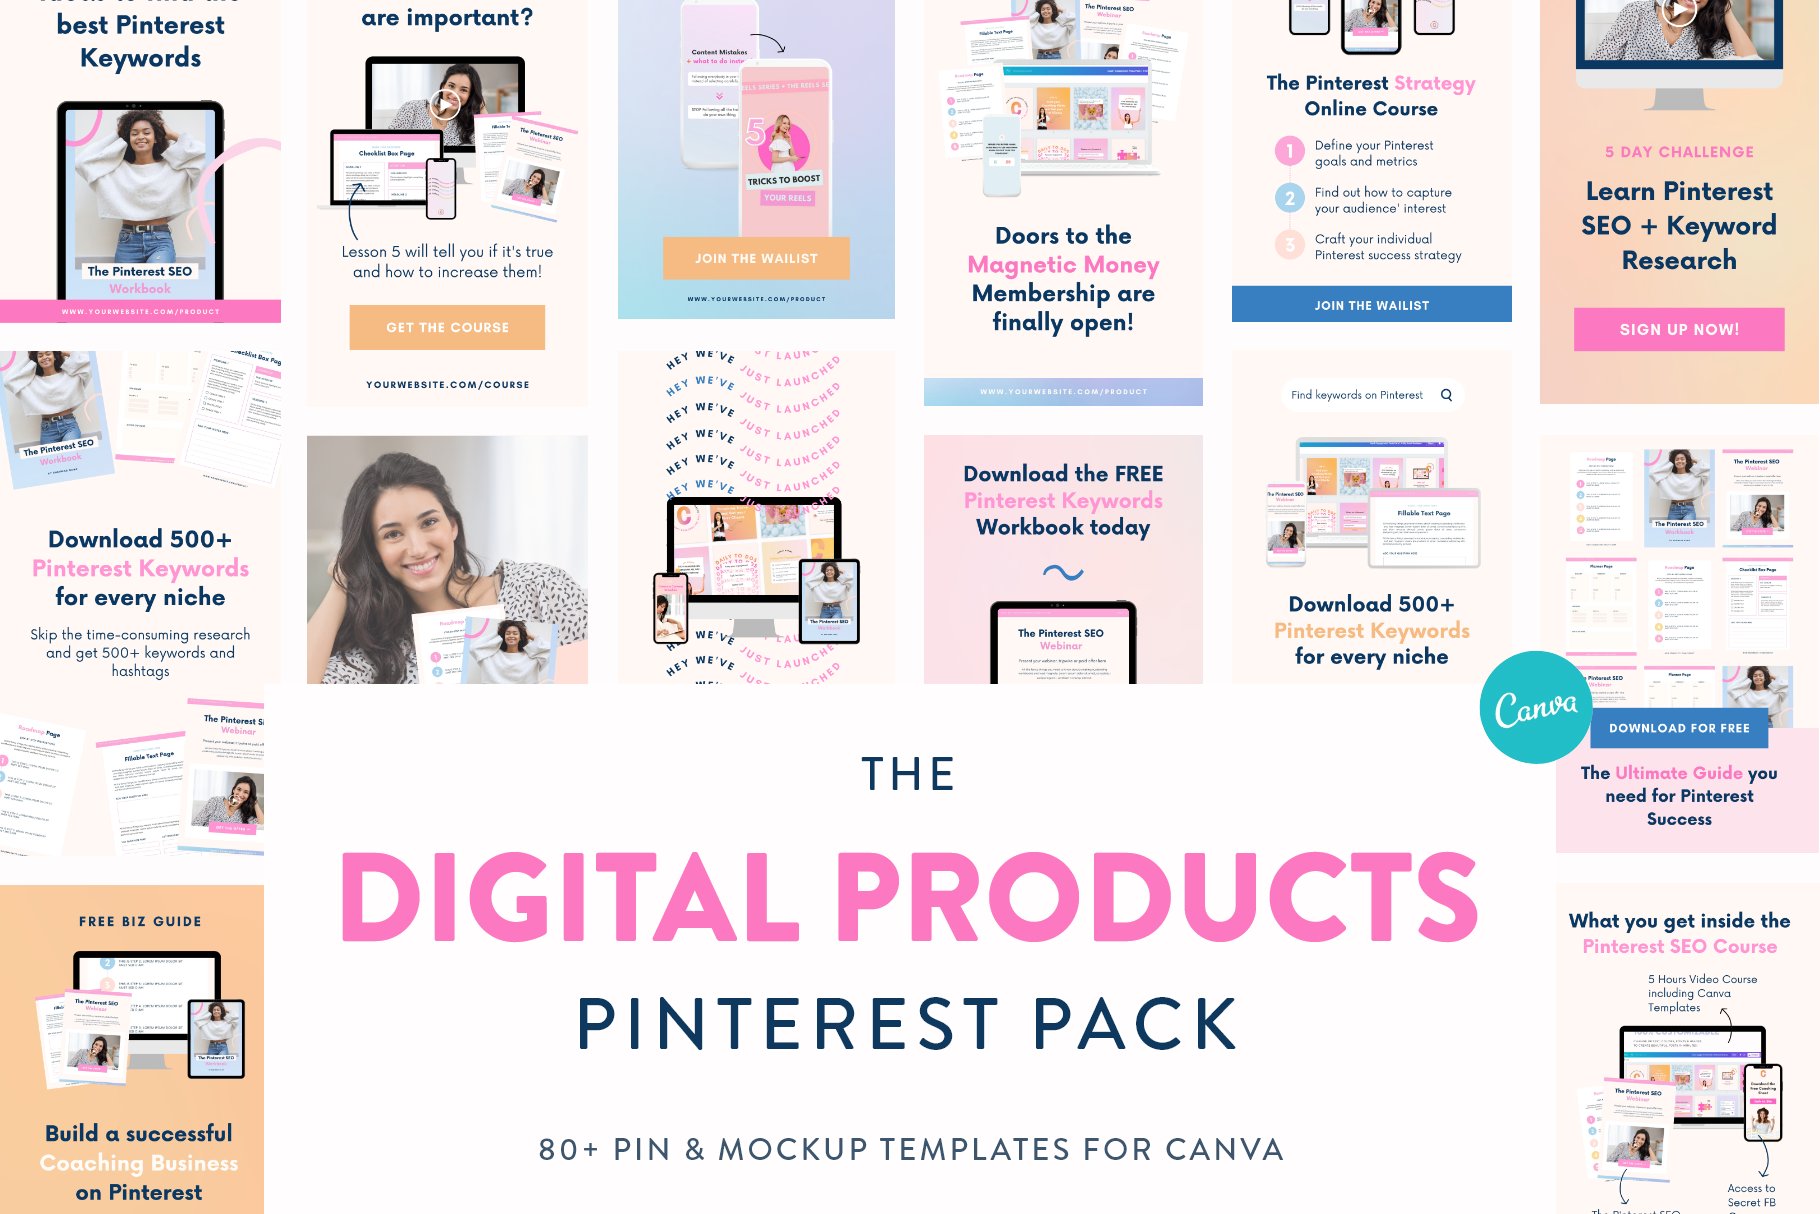 The pretty digital products.